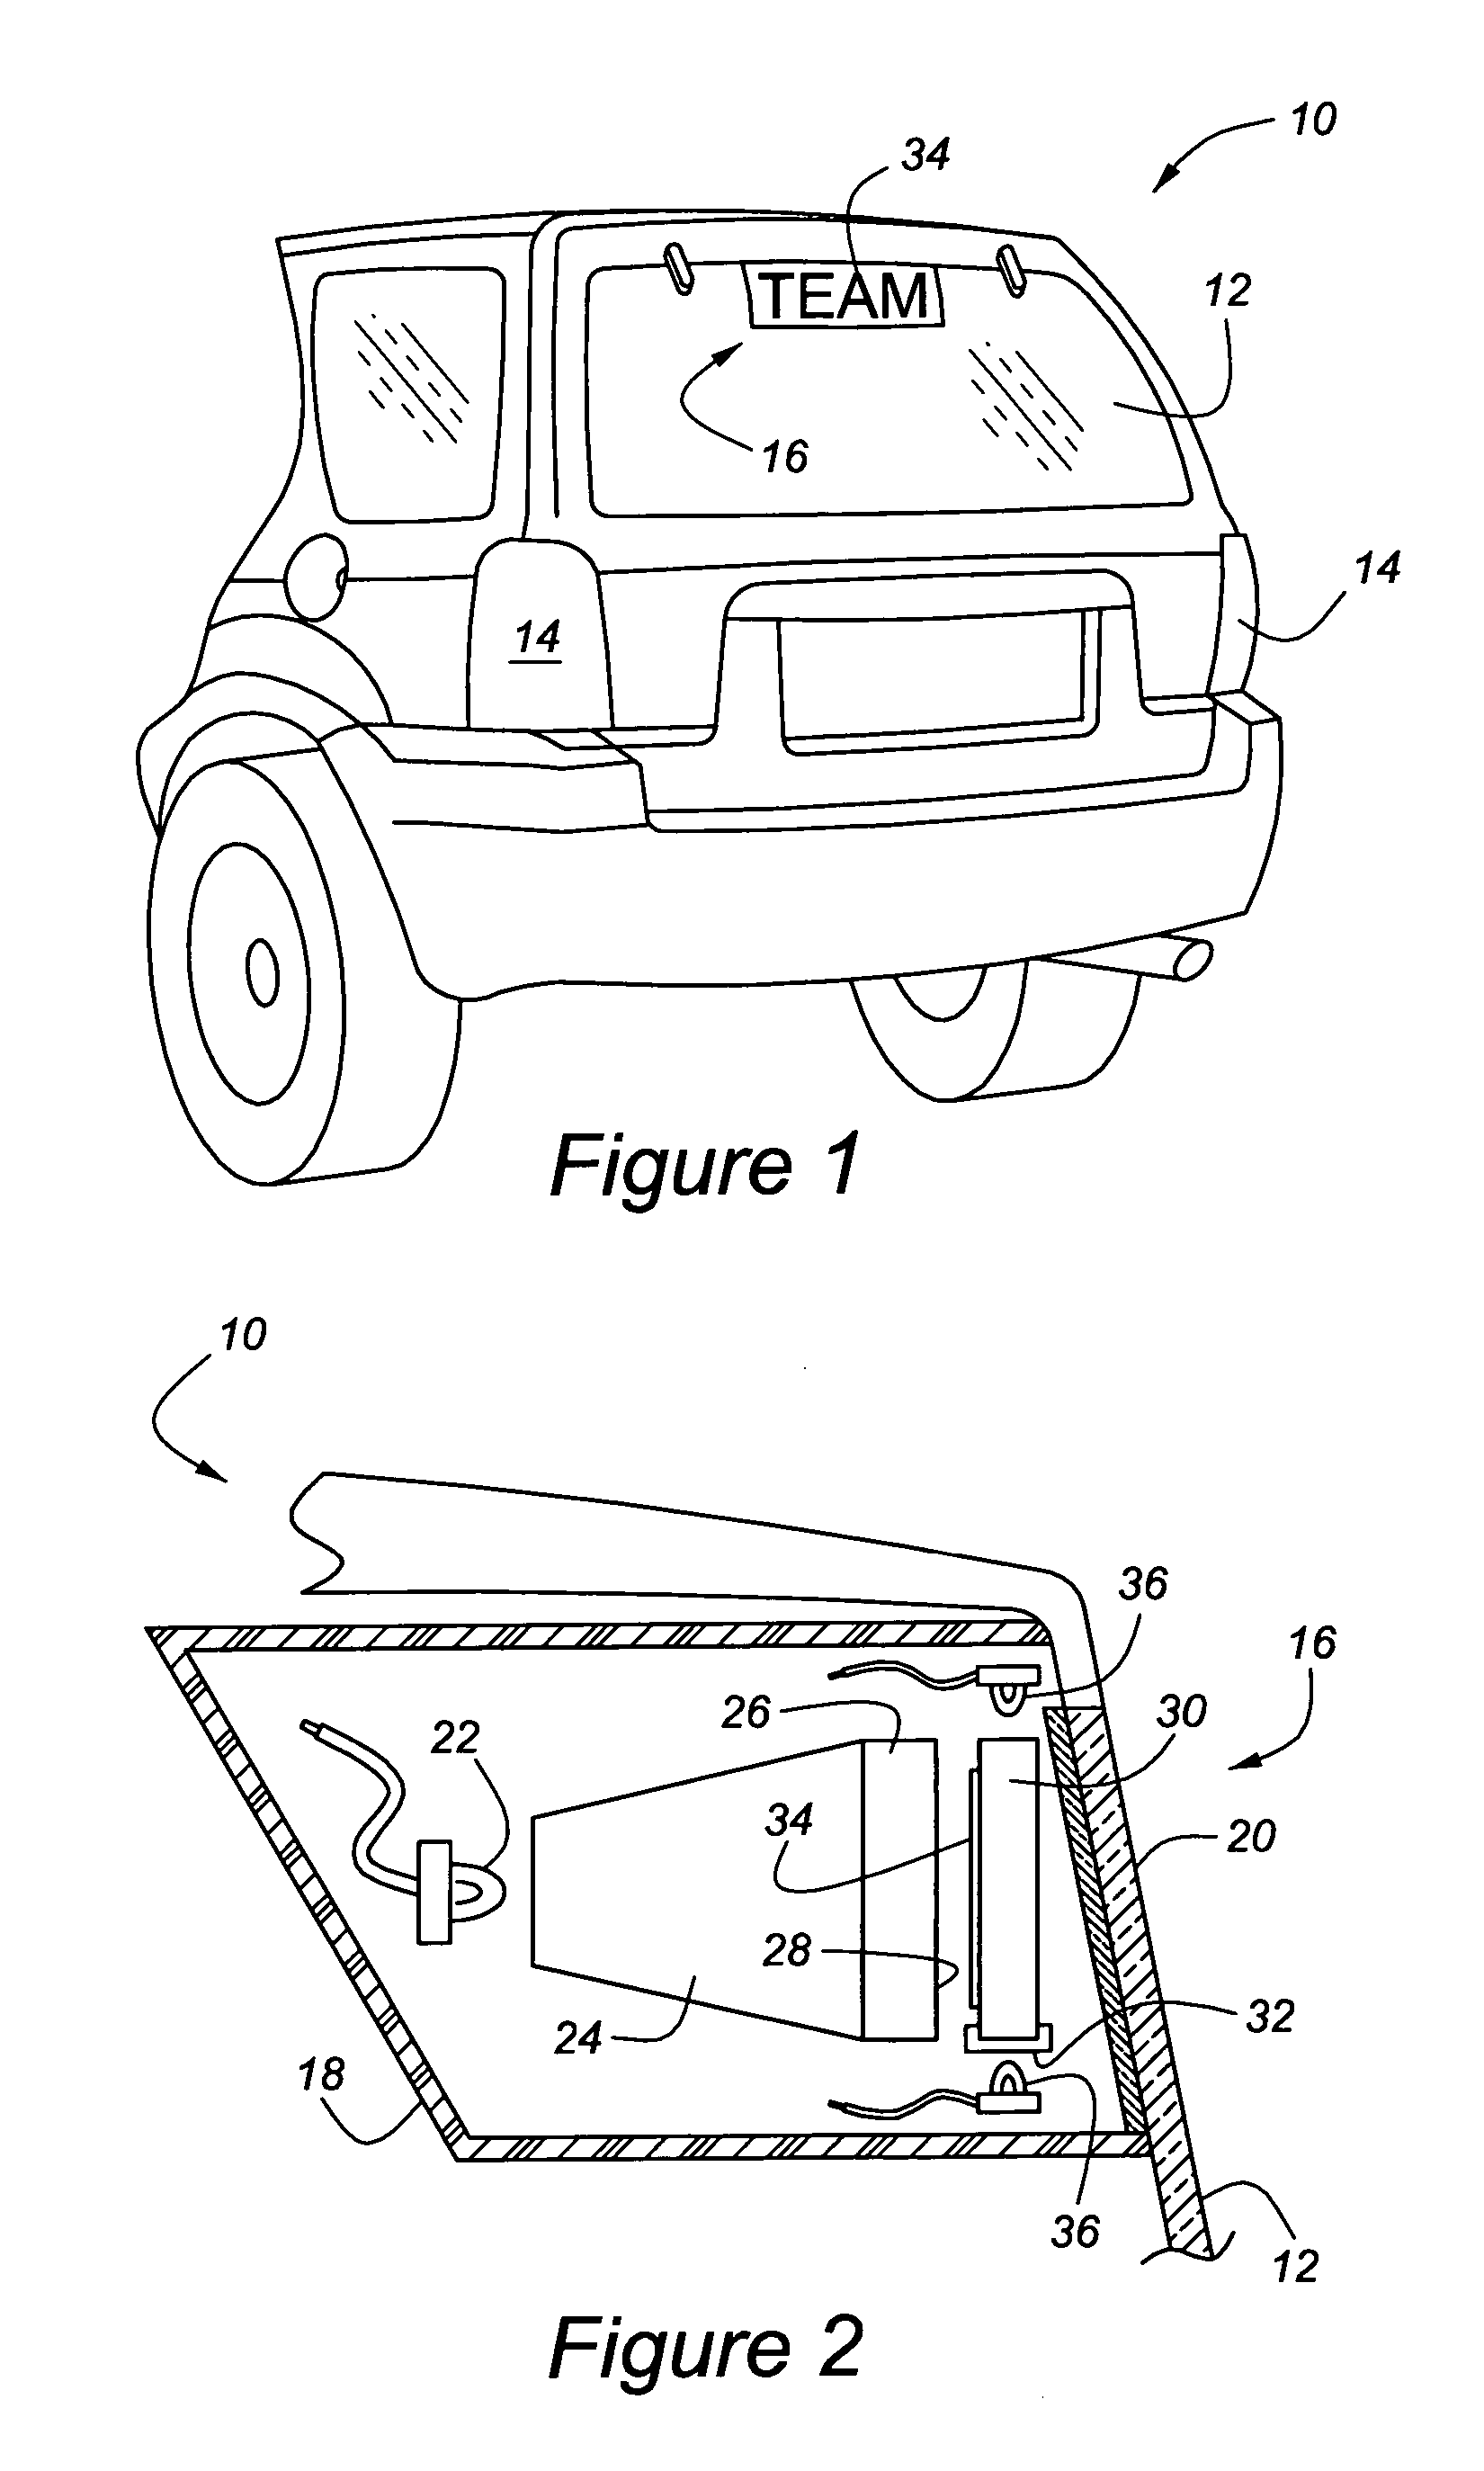 Vehicular lighting fixture with non-directional dispersion of light